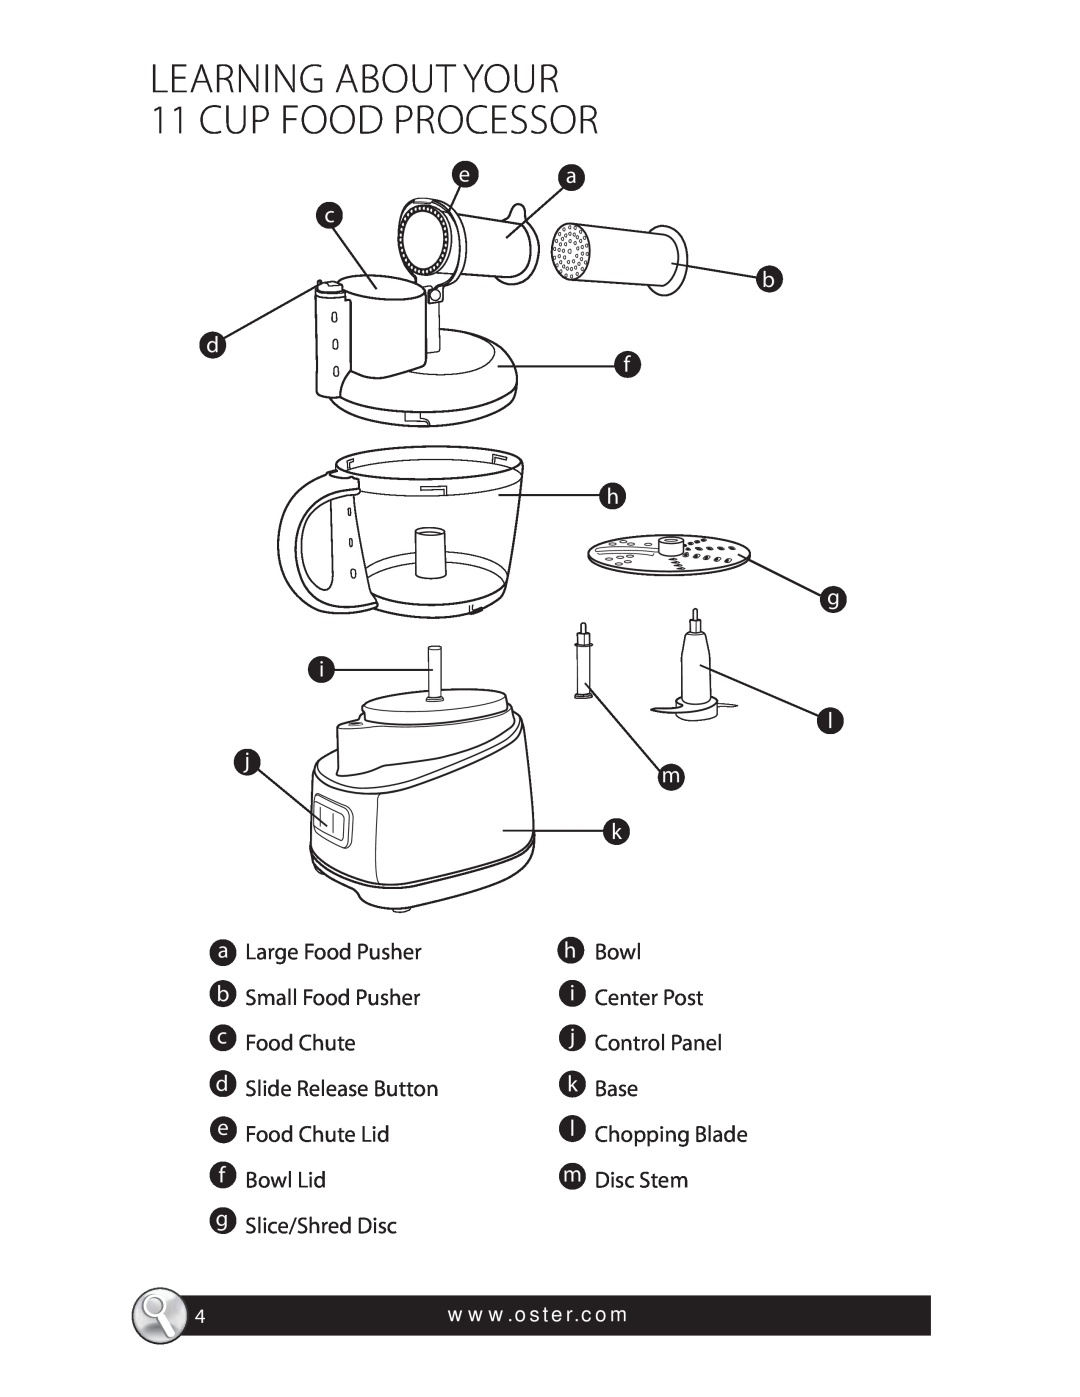 Oster FPSTFP4250 warranty LEARNING ABOUT YOUR 11 CUP FOOD PROCESSOR, e c d i j, d Slide Release Button e Food Chute Lid 